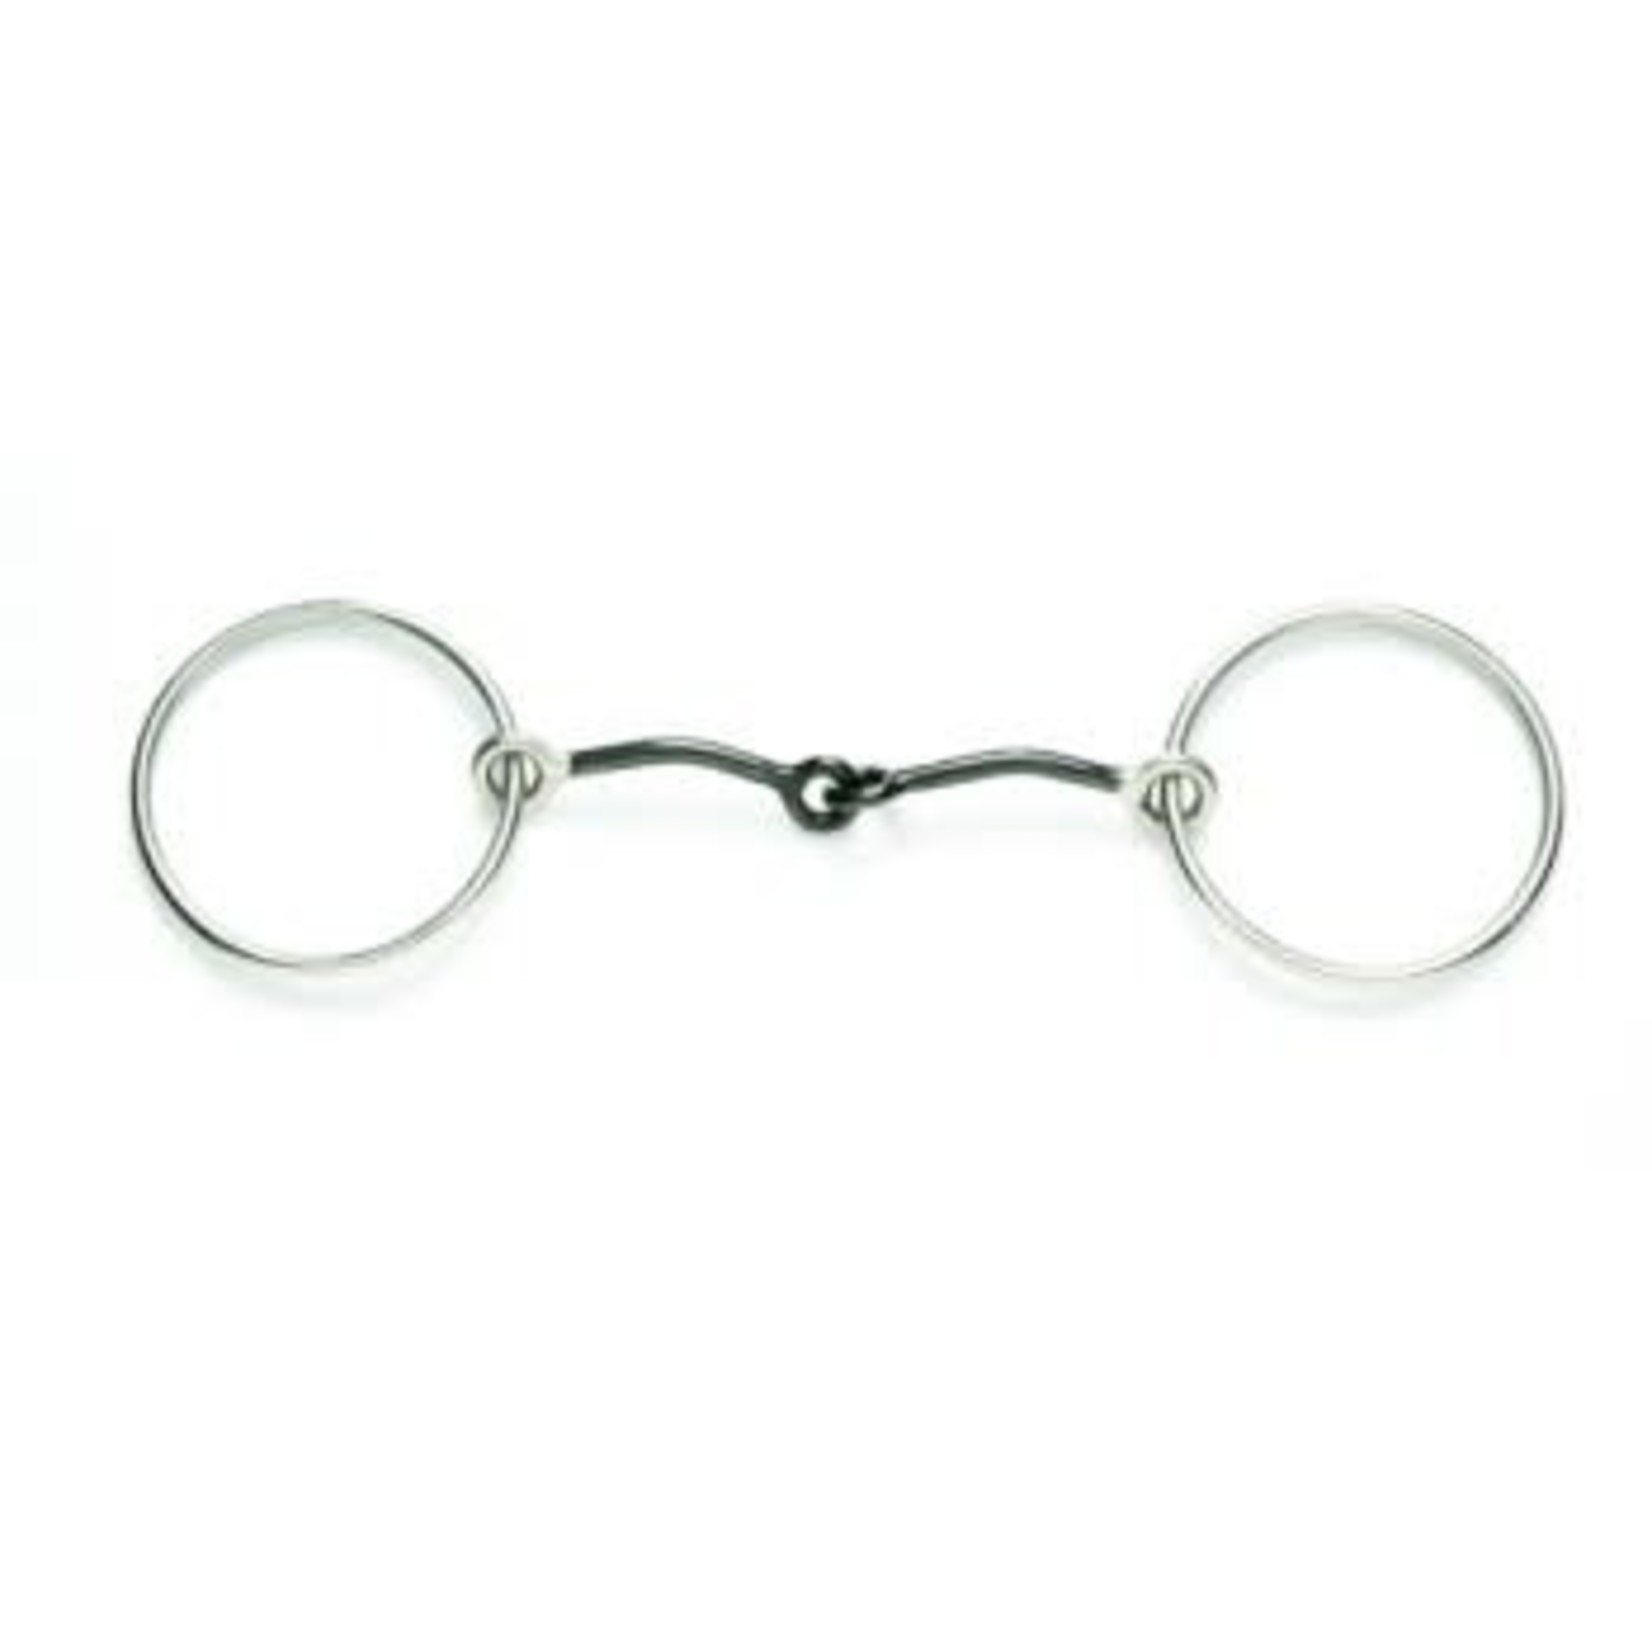 Sierra Thin Mouth Ring Snaffle